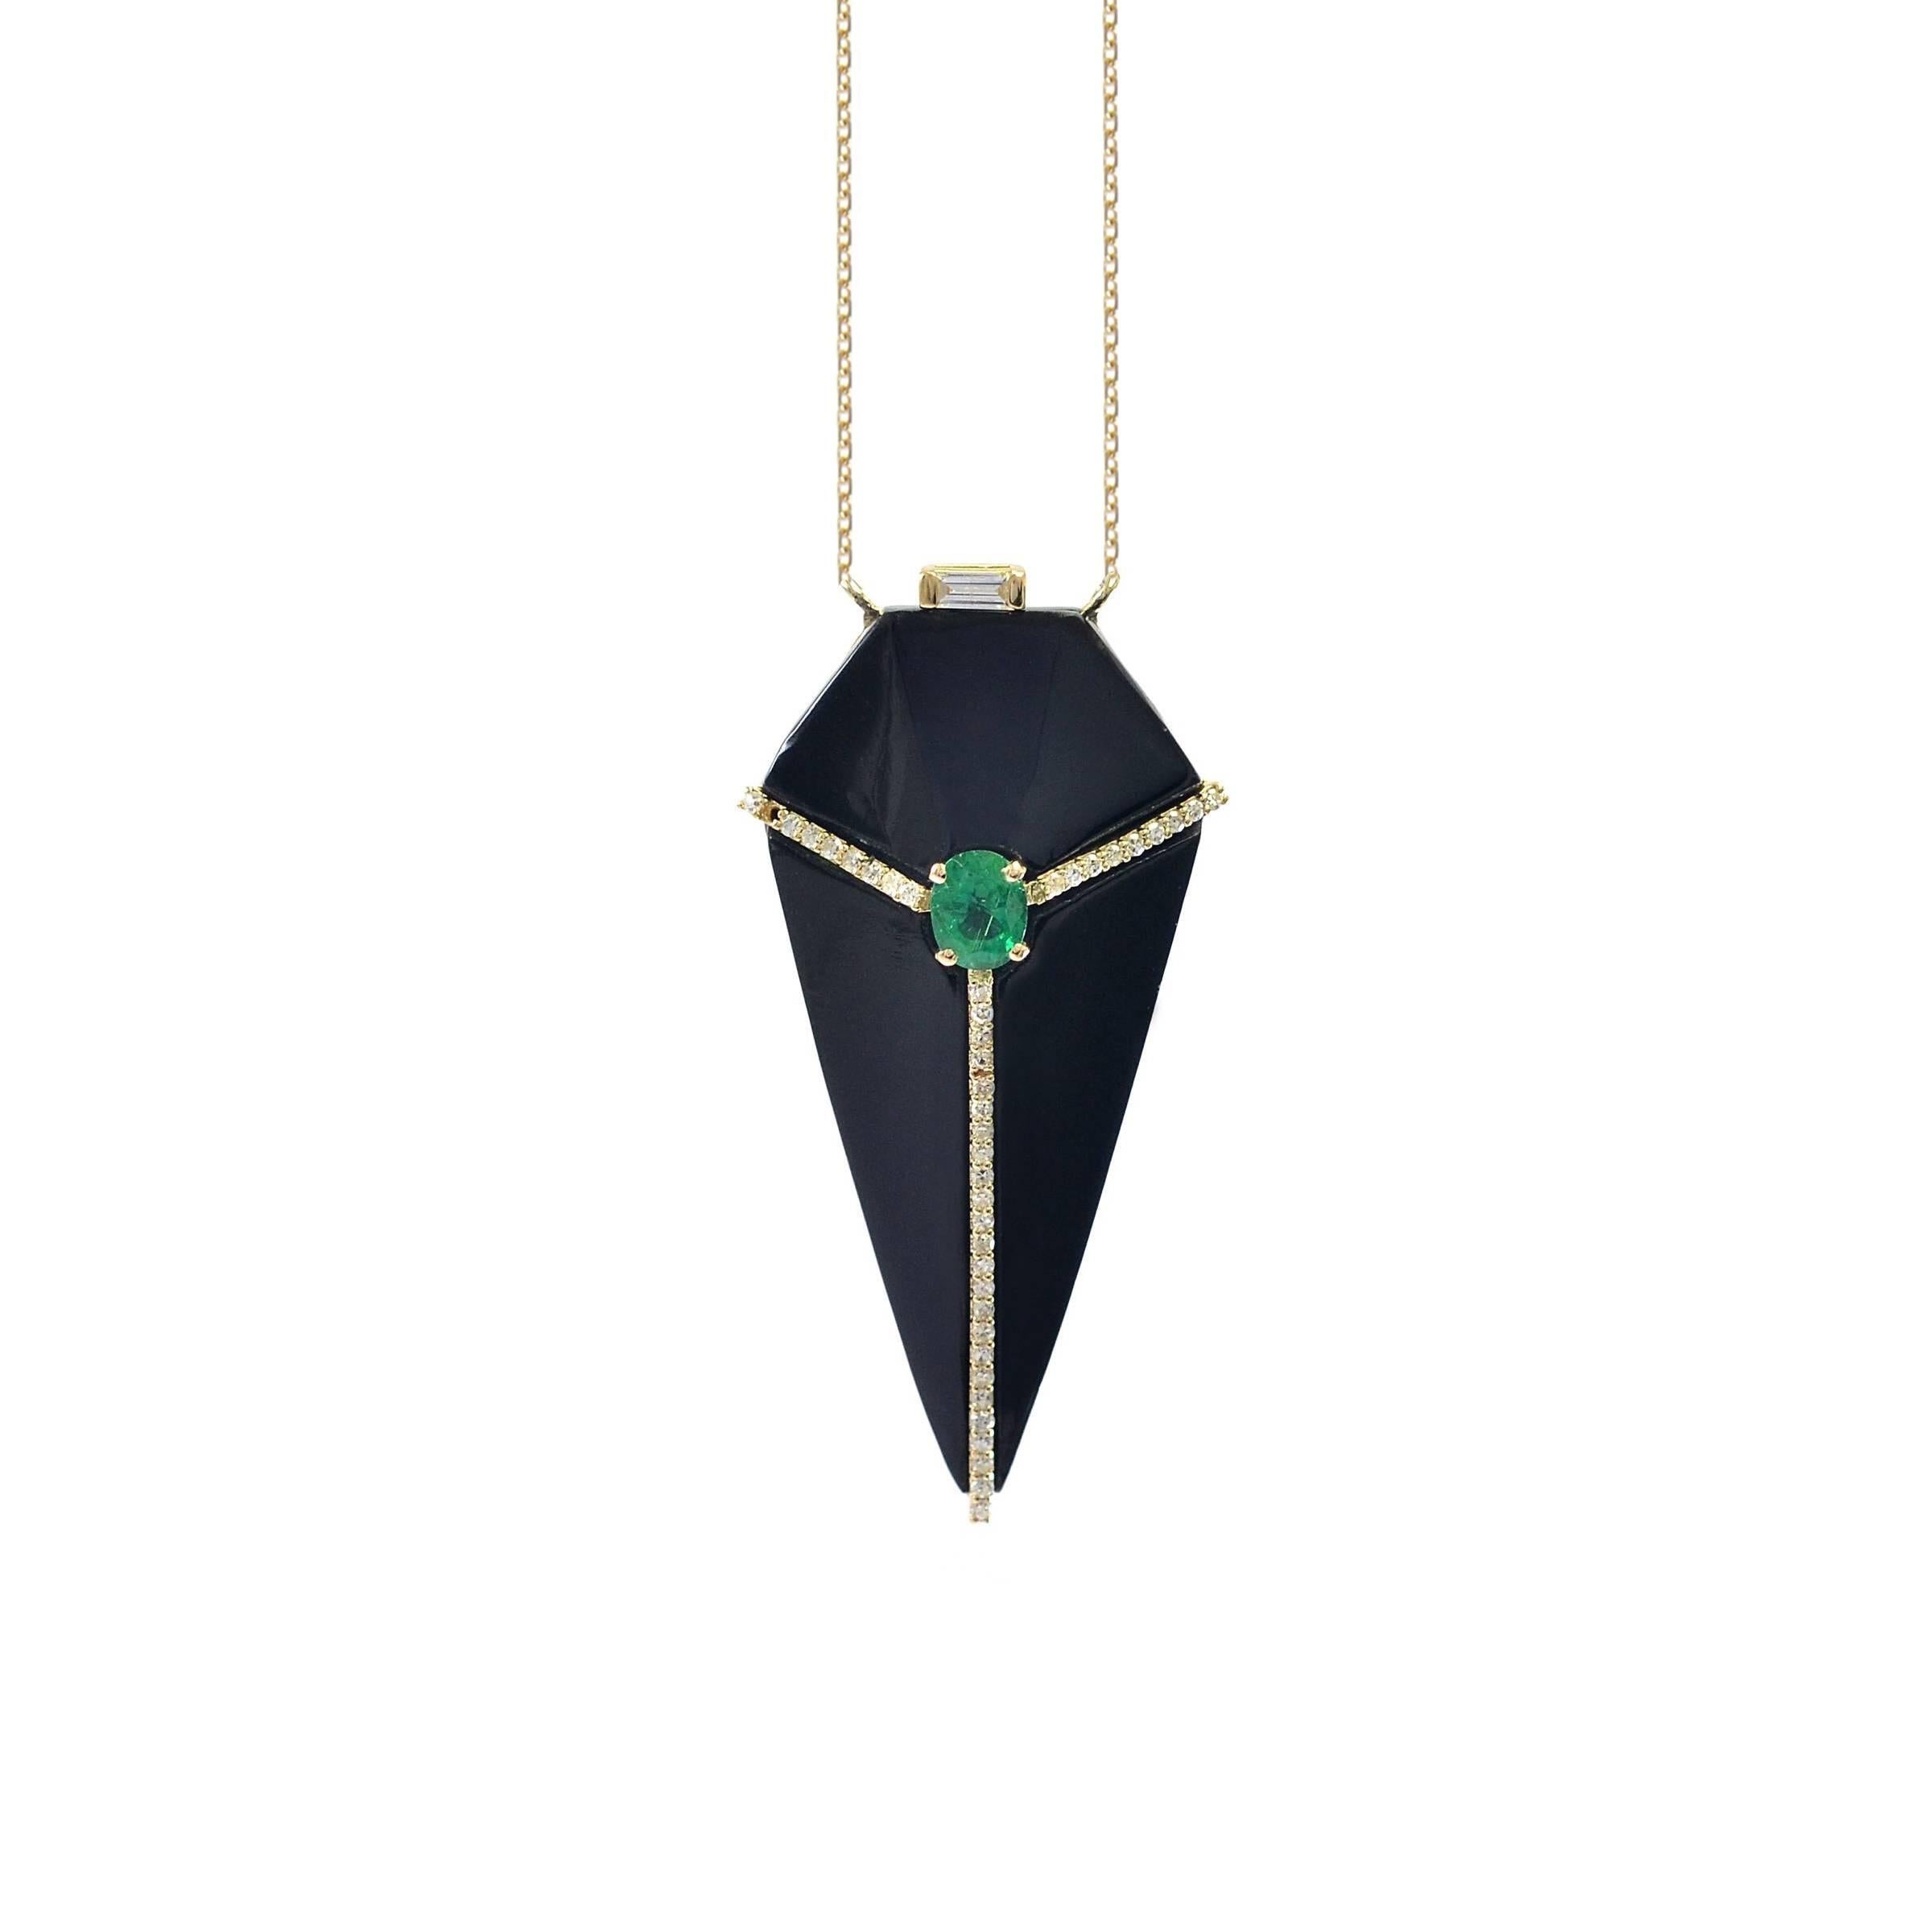 Cubist Onyx Pendant Necklace with Diamonds and Emeralds